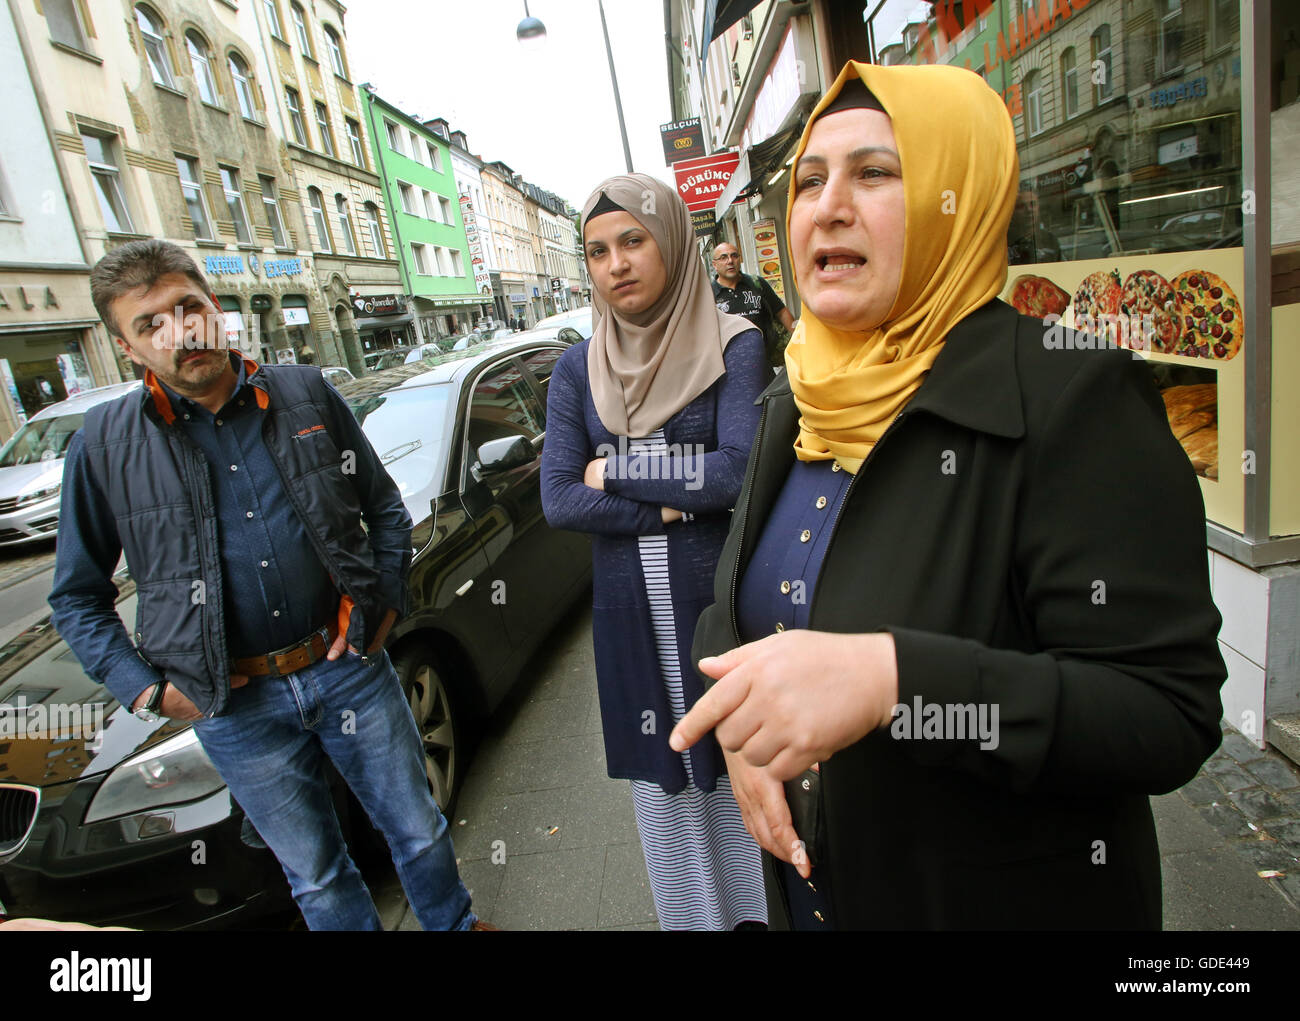 Cologne, Germany. 15th July, 2016. Turkish family Sonmez, Selcan and Aysel Meral (l-r), answer the questions of the dpa-correspondent on Keupstreet in Cologne, Germany, 15 July 2016. The Turkish military had attempted a coup the night before. Photo: Roland Weihrauch/dpa/Alamy Live News Stock Photo